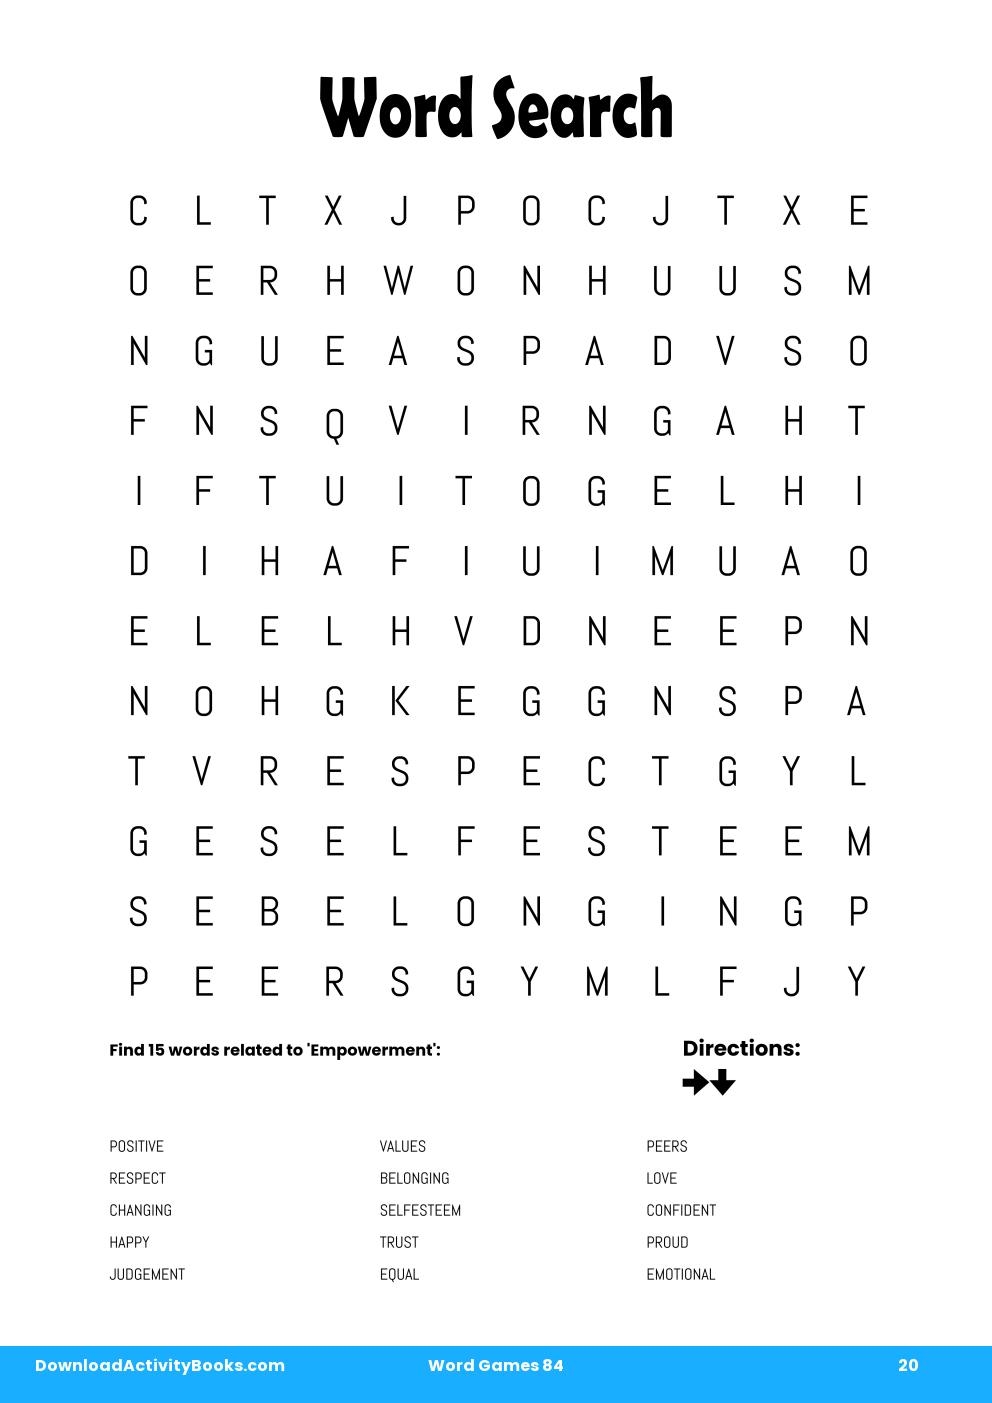 Word Search in Word Games 84